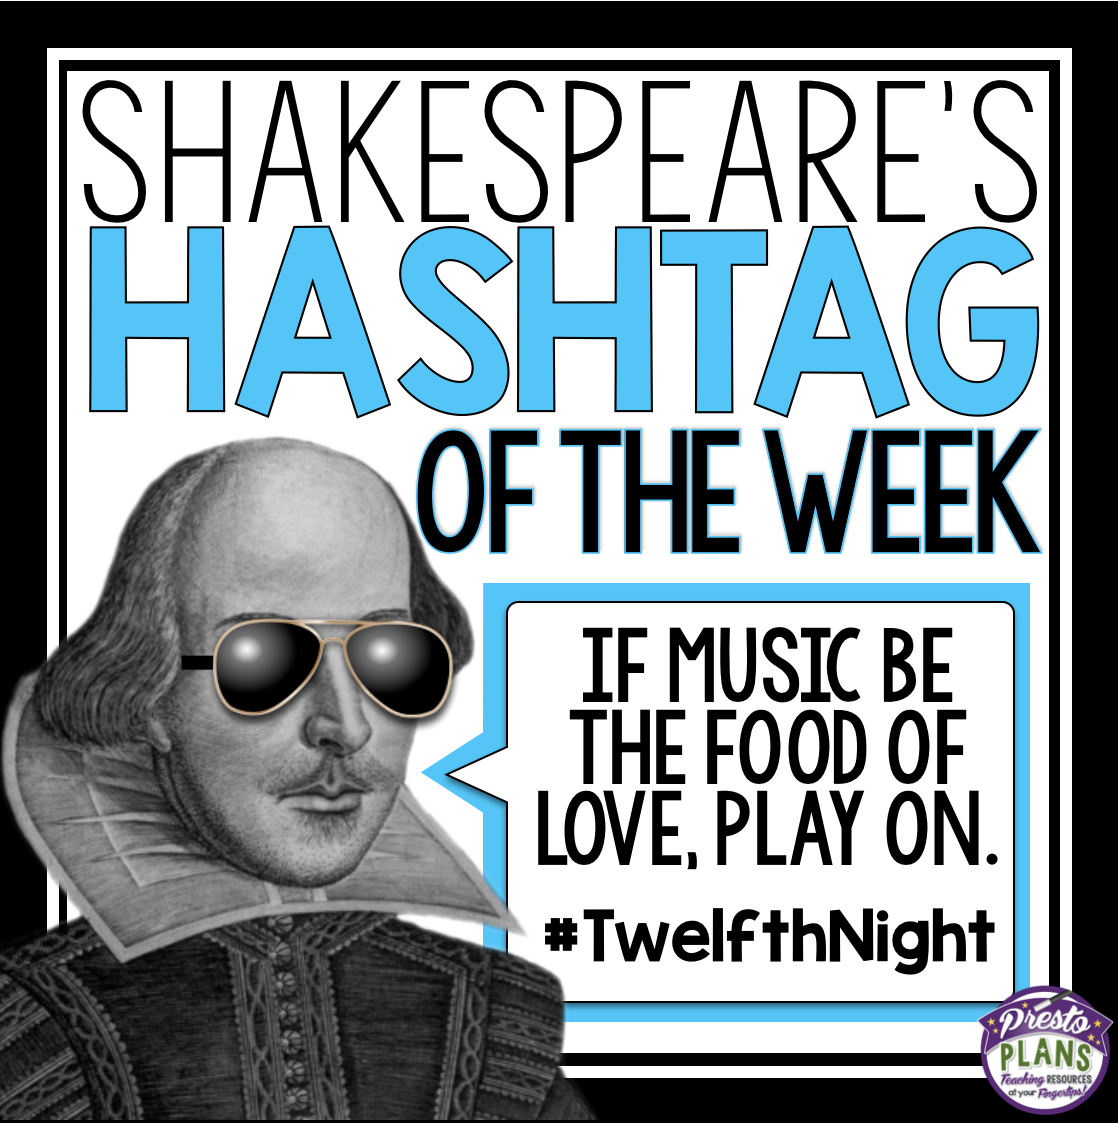 shakespeare hashtag of the week